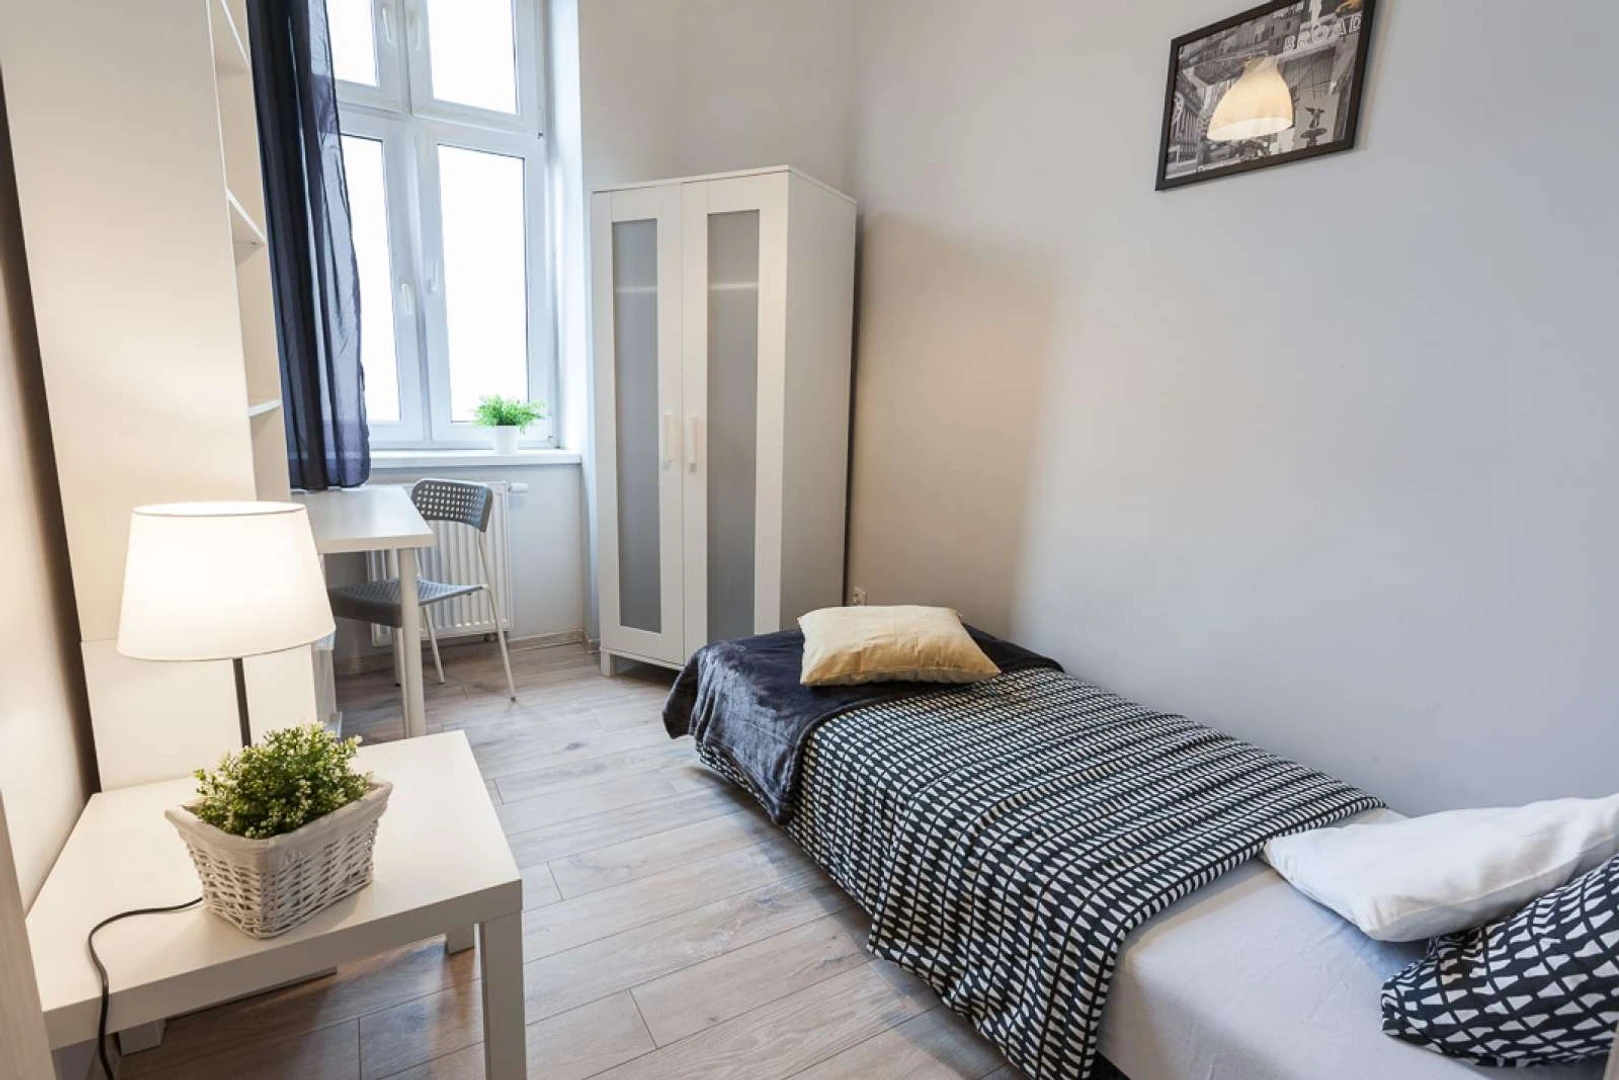 Renting rooms by the month in wrocław